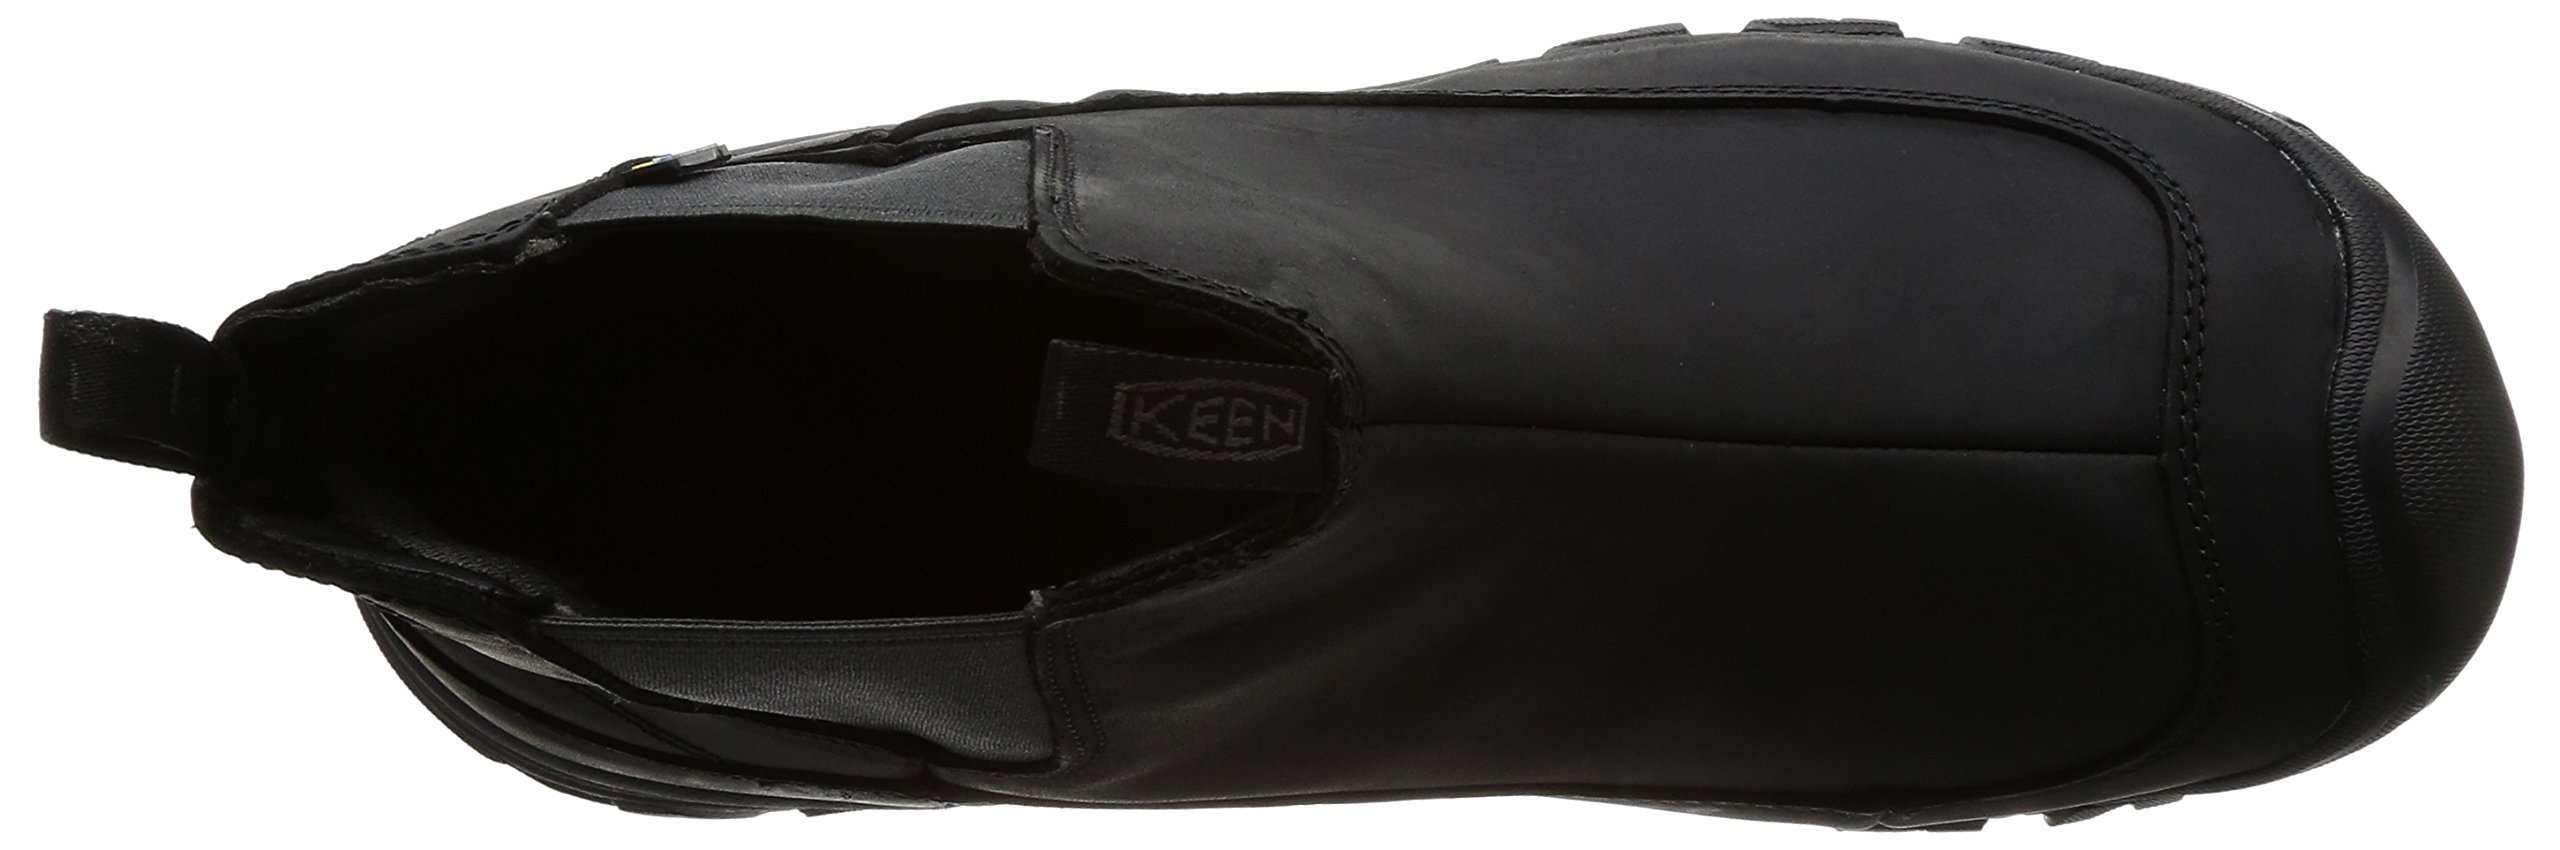 KEEN Men's Anchorage 3 Waterproof Pull on Insulated Snow Boots